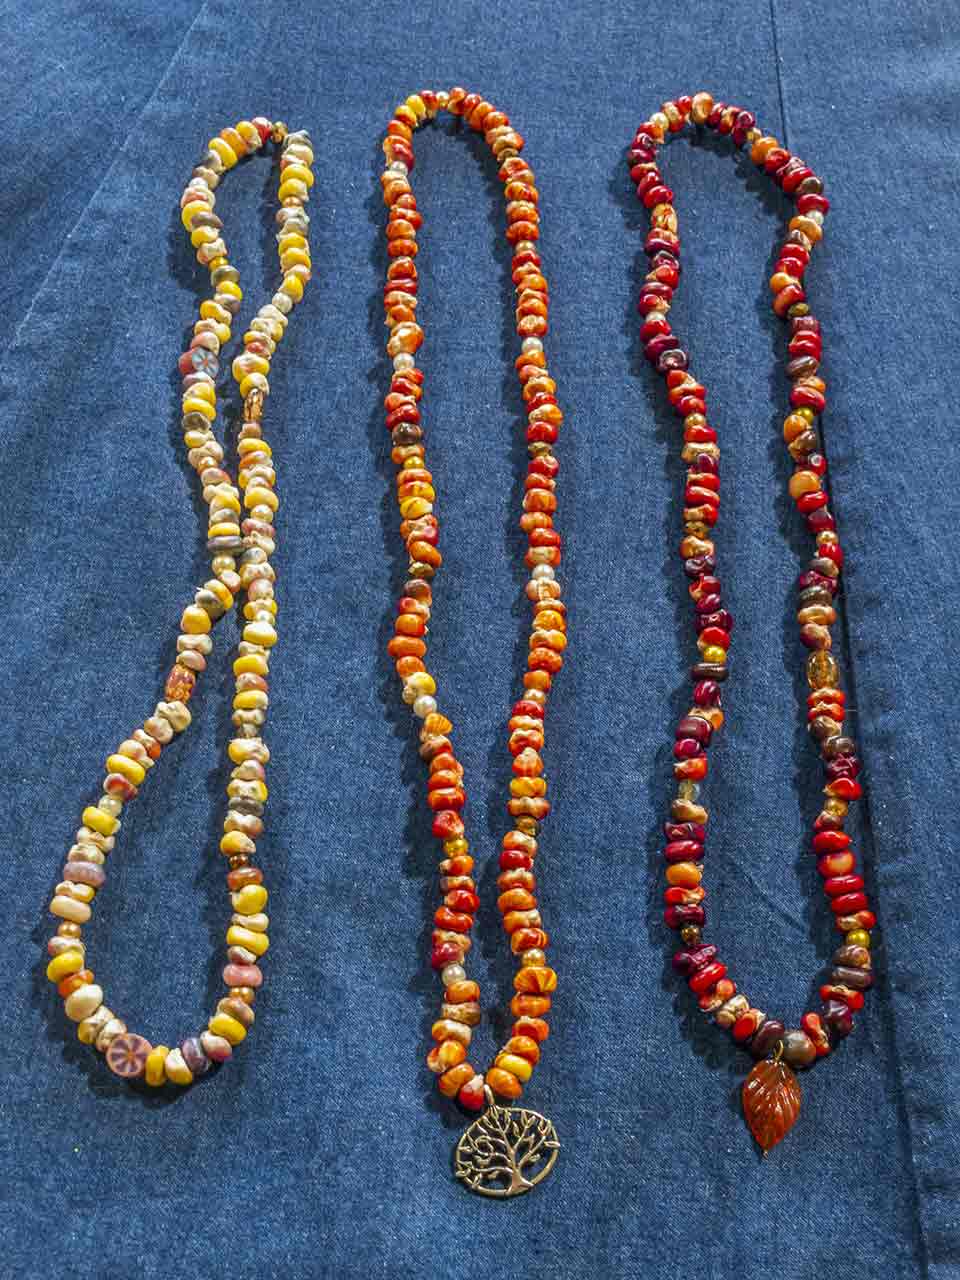 Indian Corn Necklaces - Mary B.